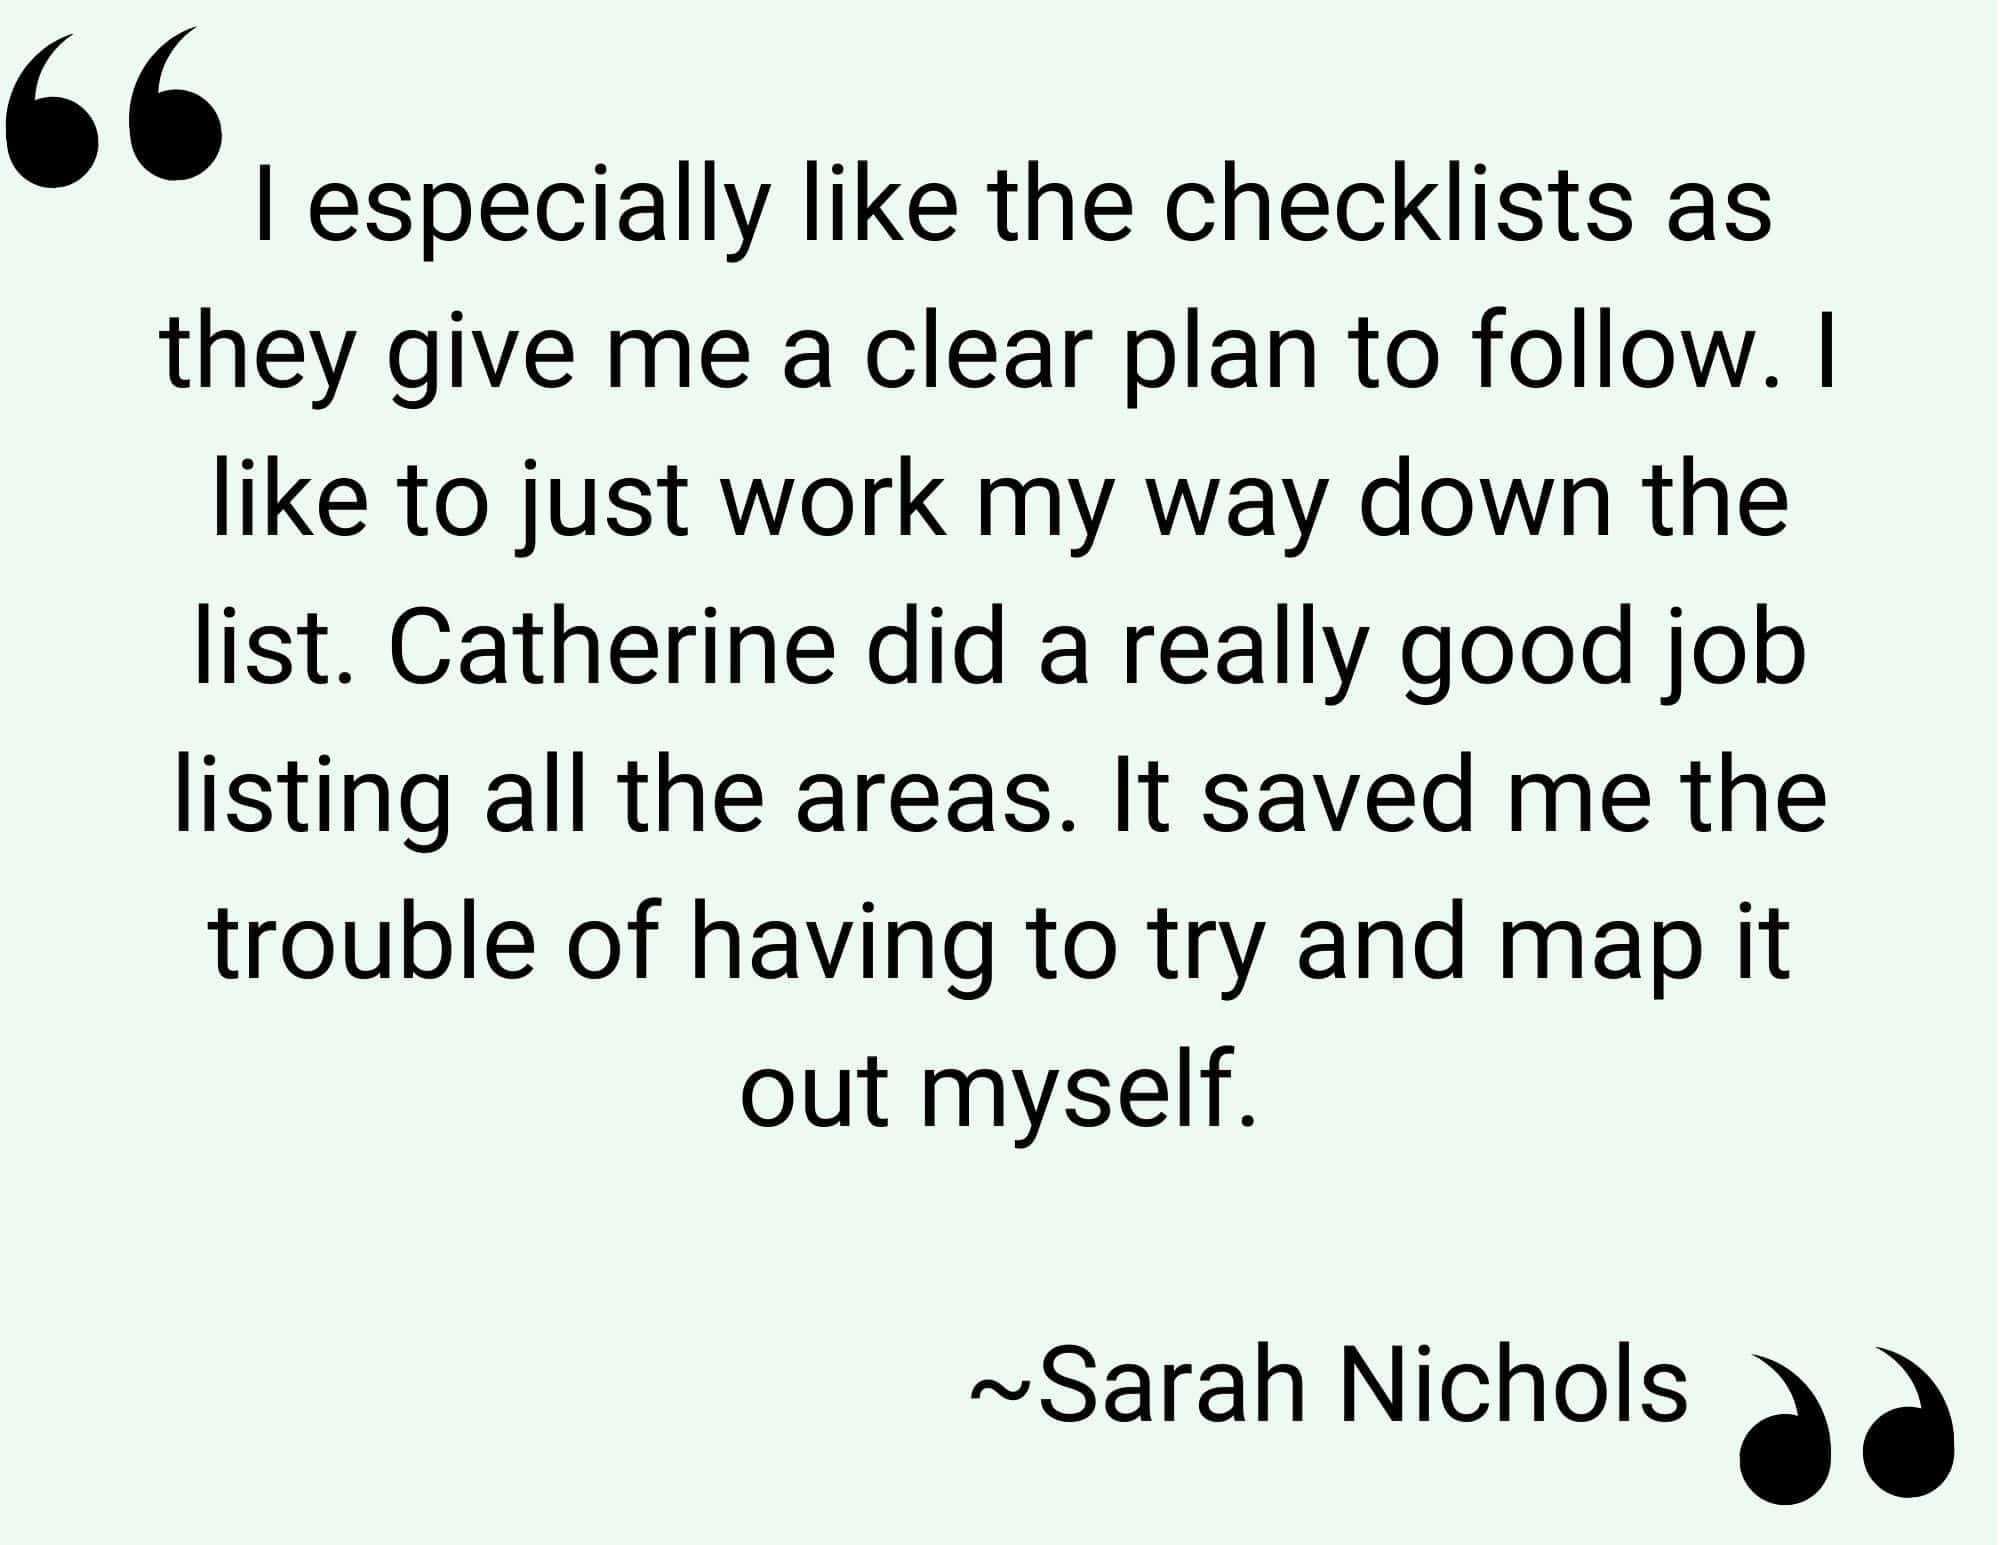 Quote of Sarah Nichols, 'I especially like the checklists as they give me a clear path to follow. I like to just work my way down the list. Catehreine dis a really good job listing all the areas. It saved me the trouble of having to try and map it out myself.' - Decluttering Journey Workbook